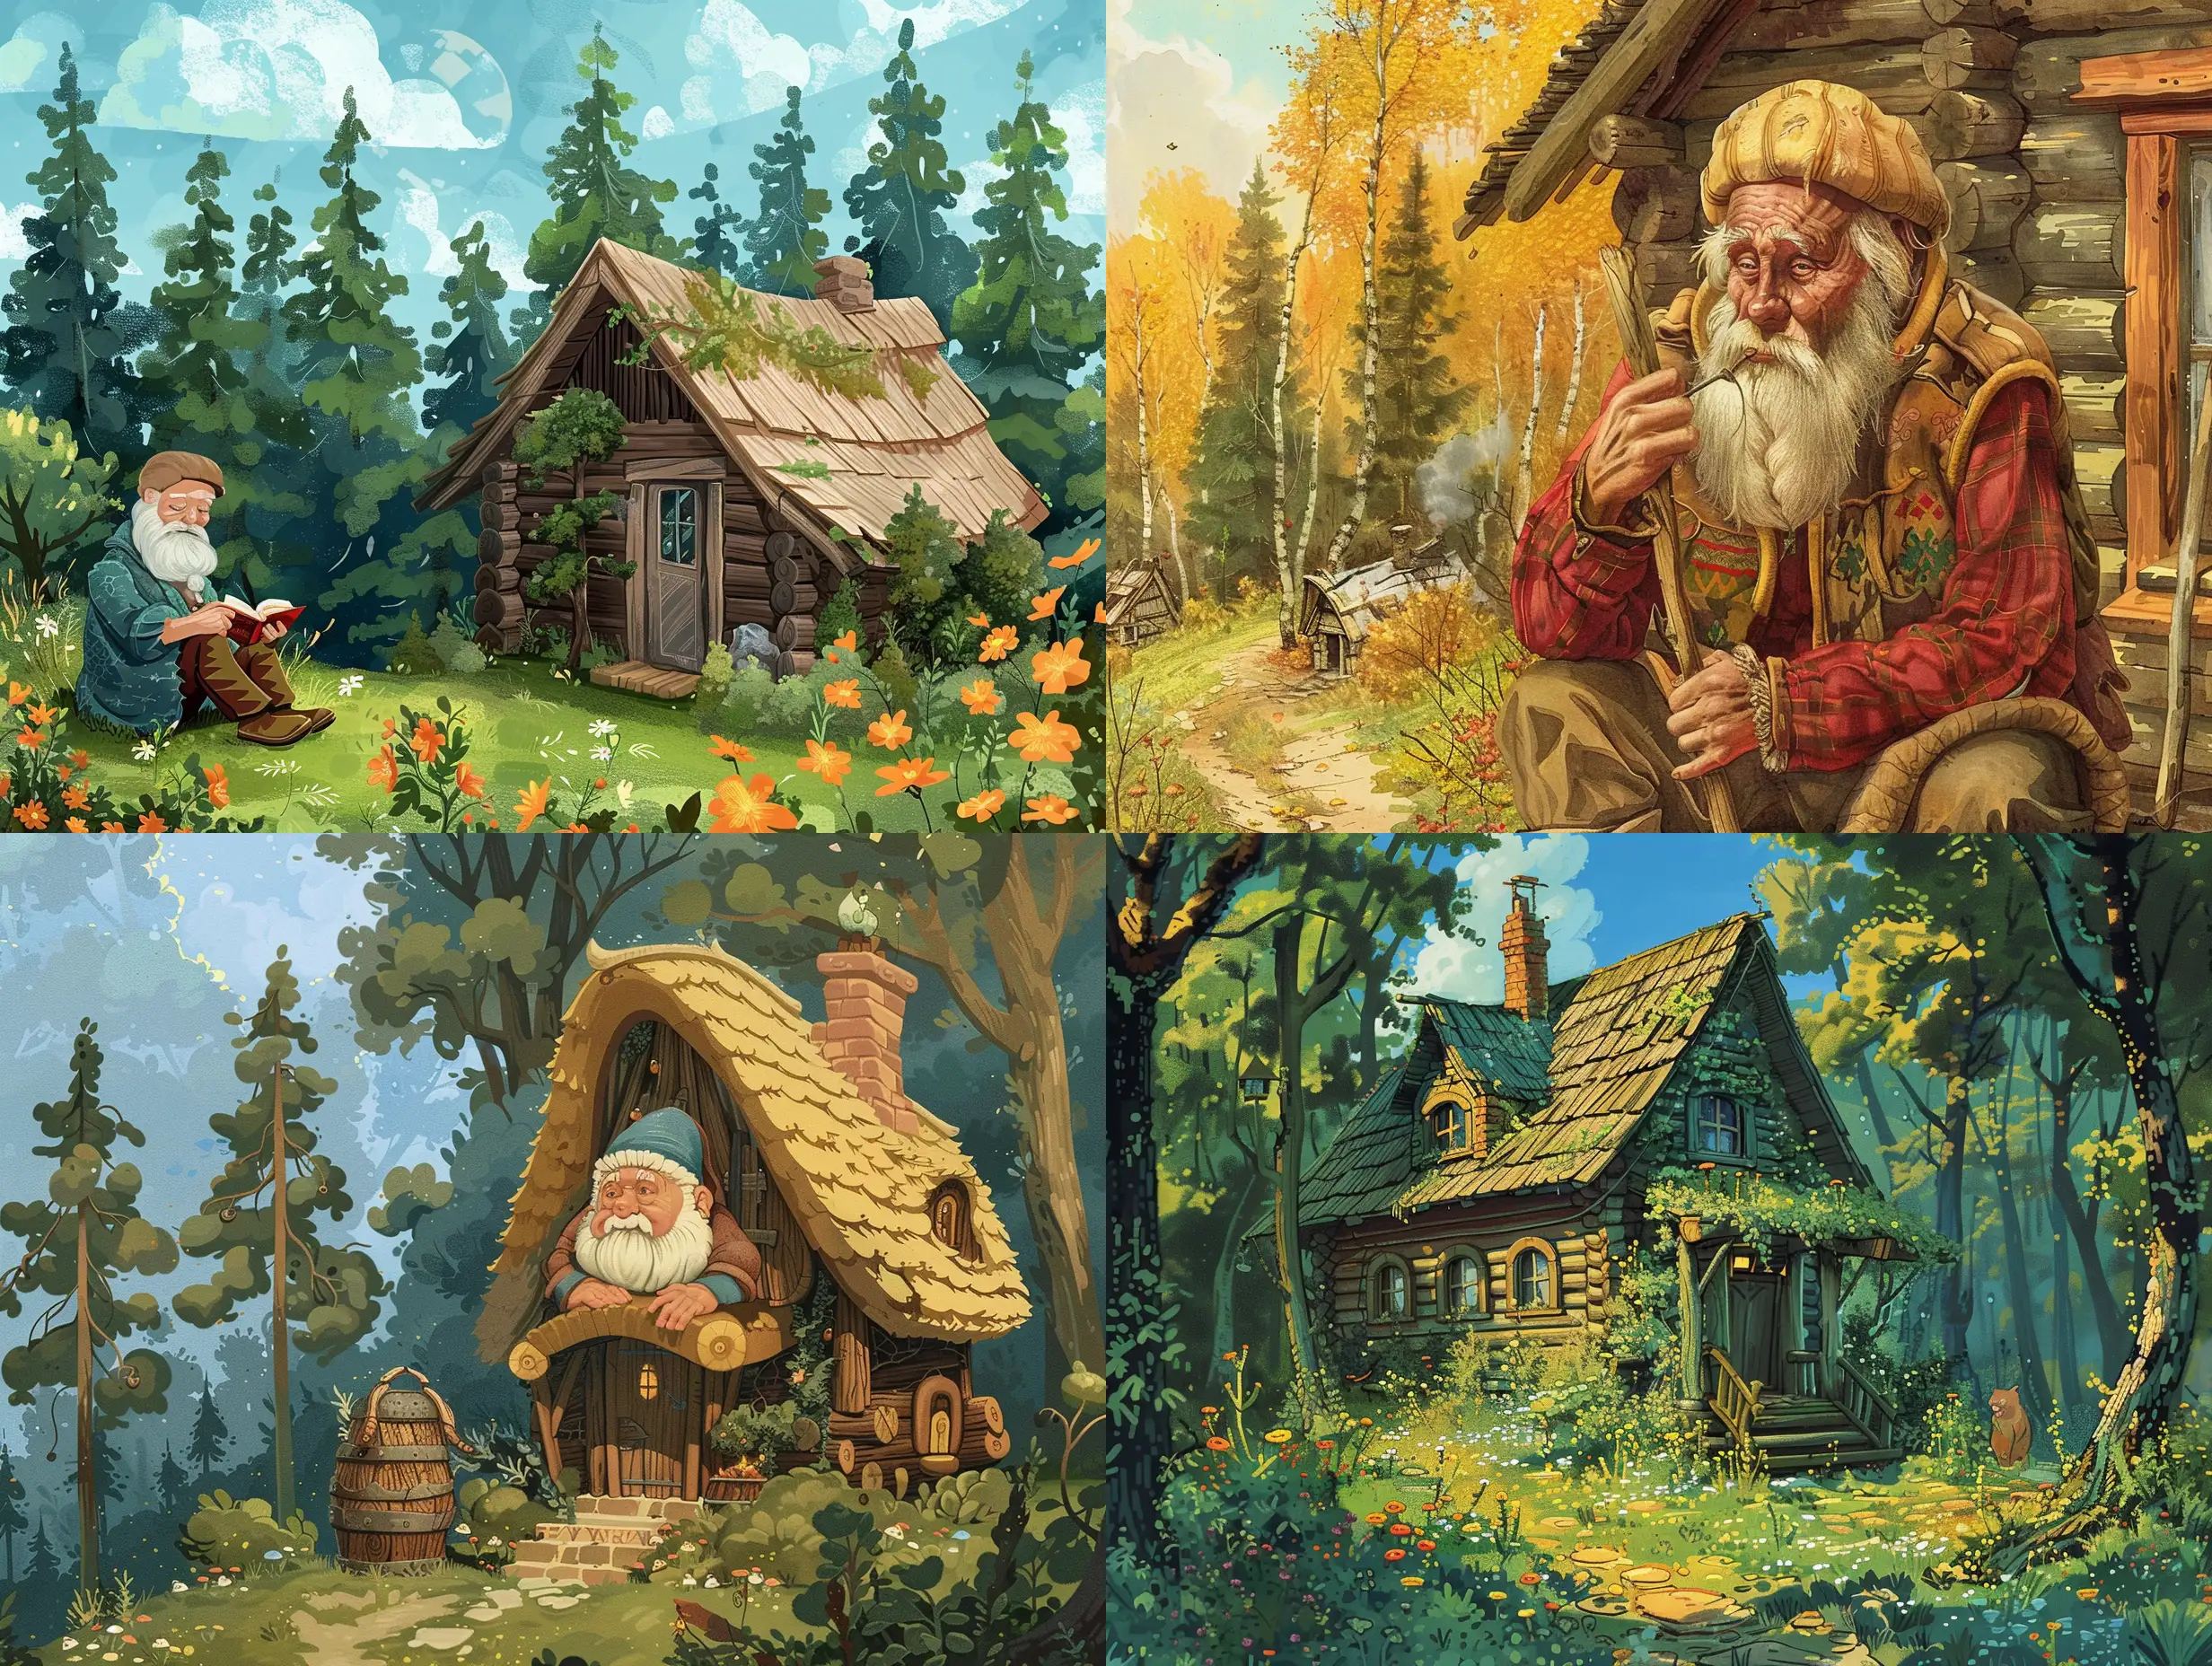 Illustration like a Disney fairytale about the russian man  50-years old who lives in the small wood house in the forest